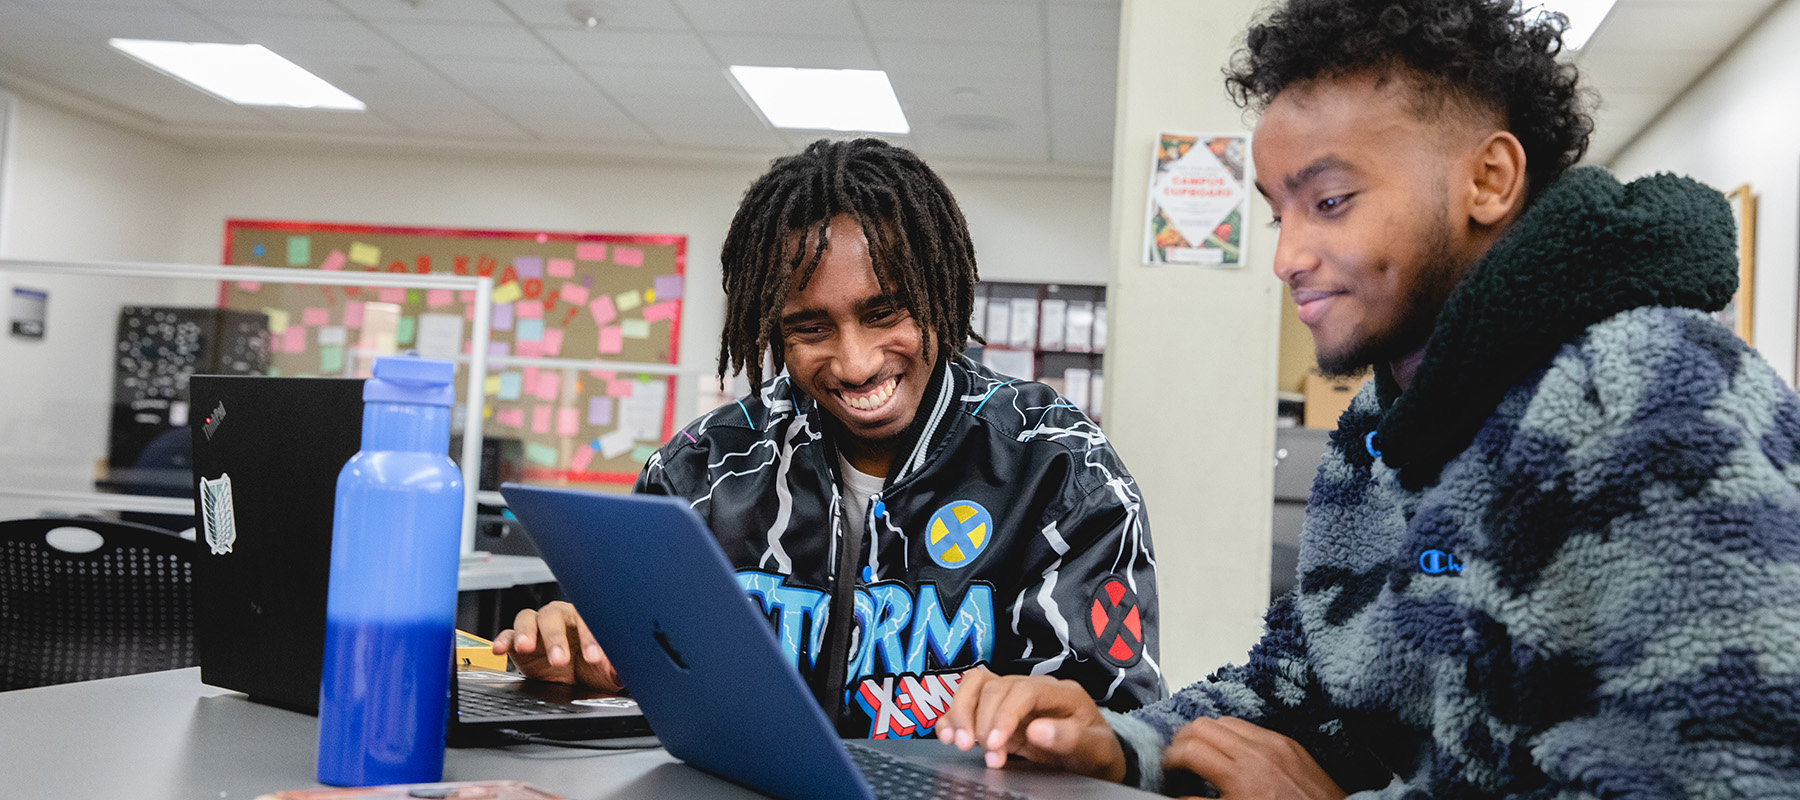 Two students work on a laptop.